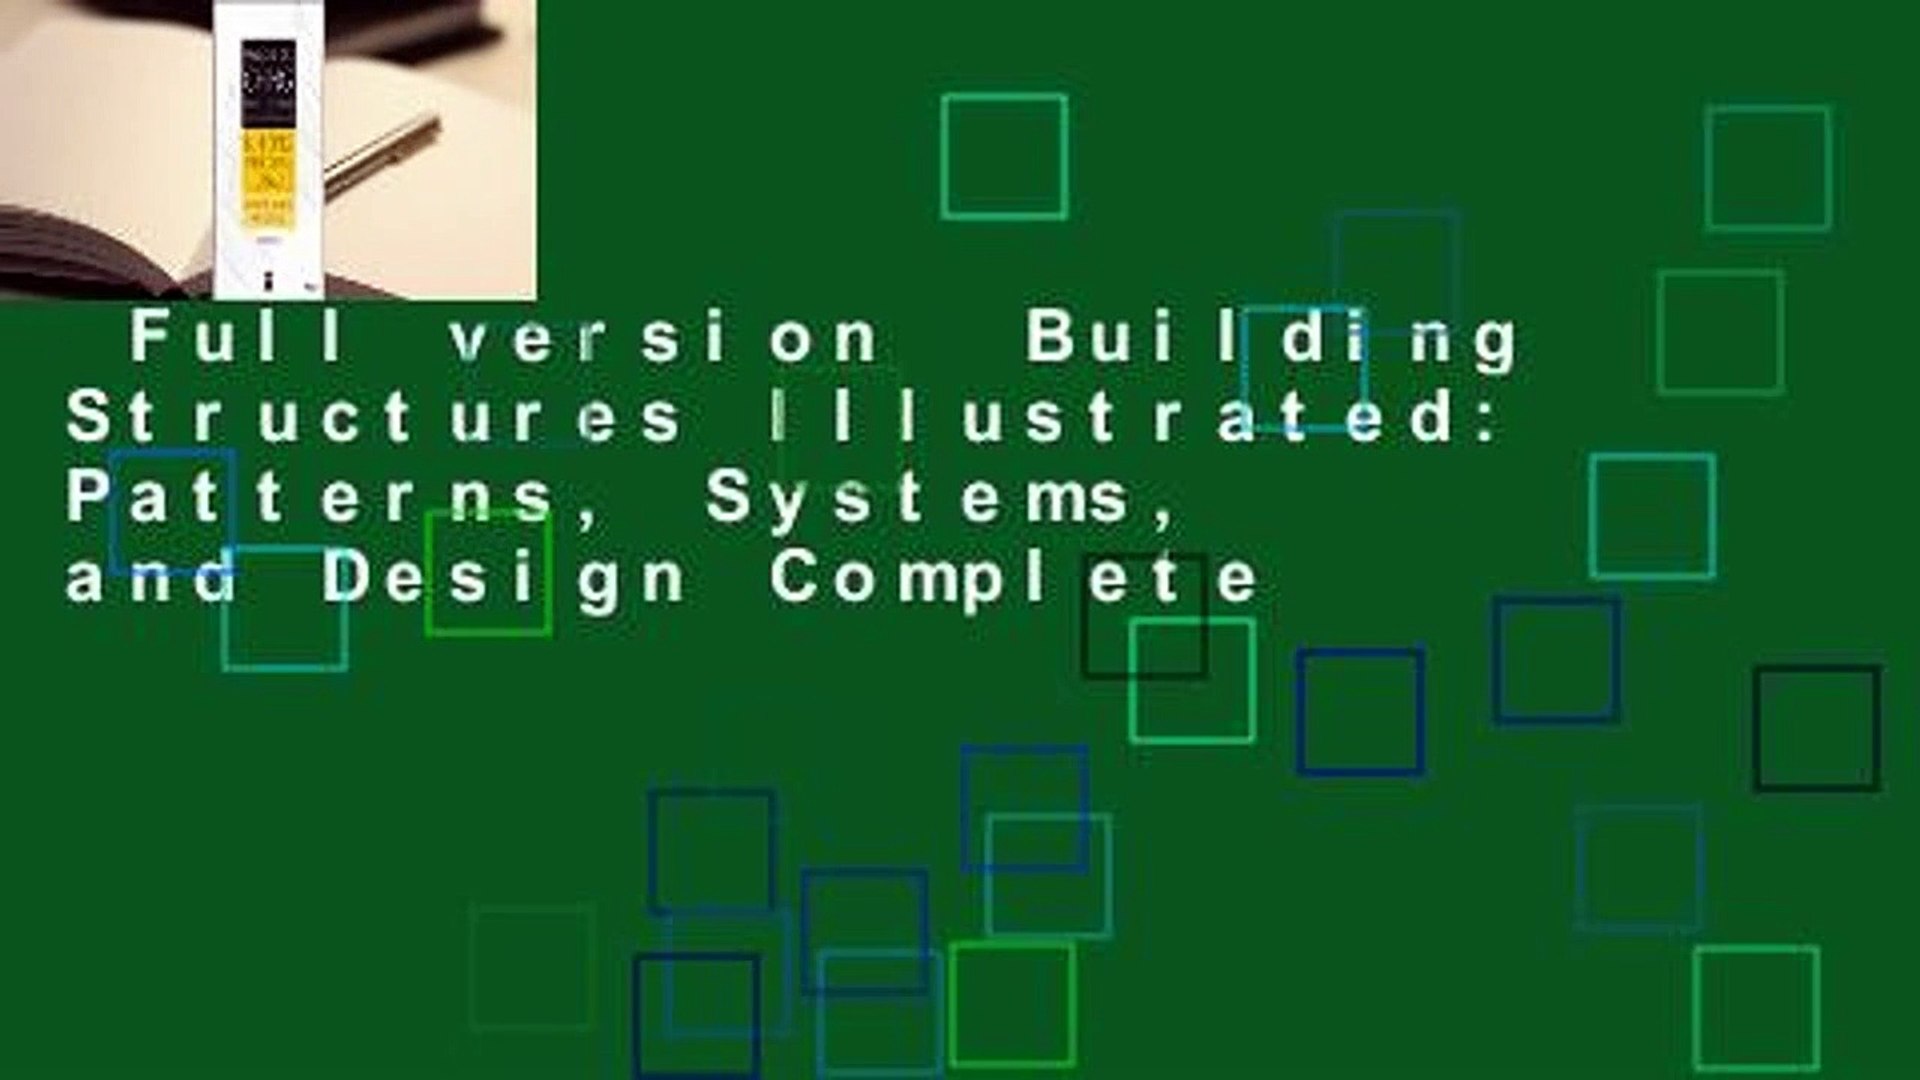 Full version  Building Structures Illustrated: Patterns, Systems, and Design Complete